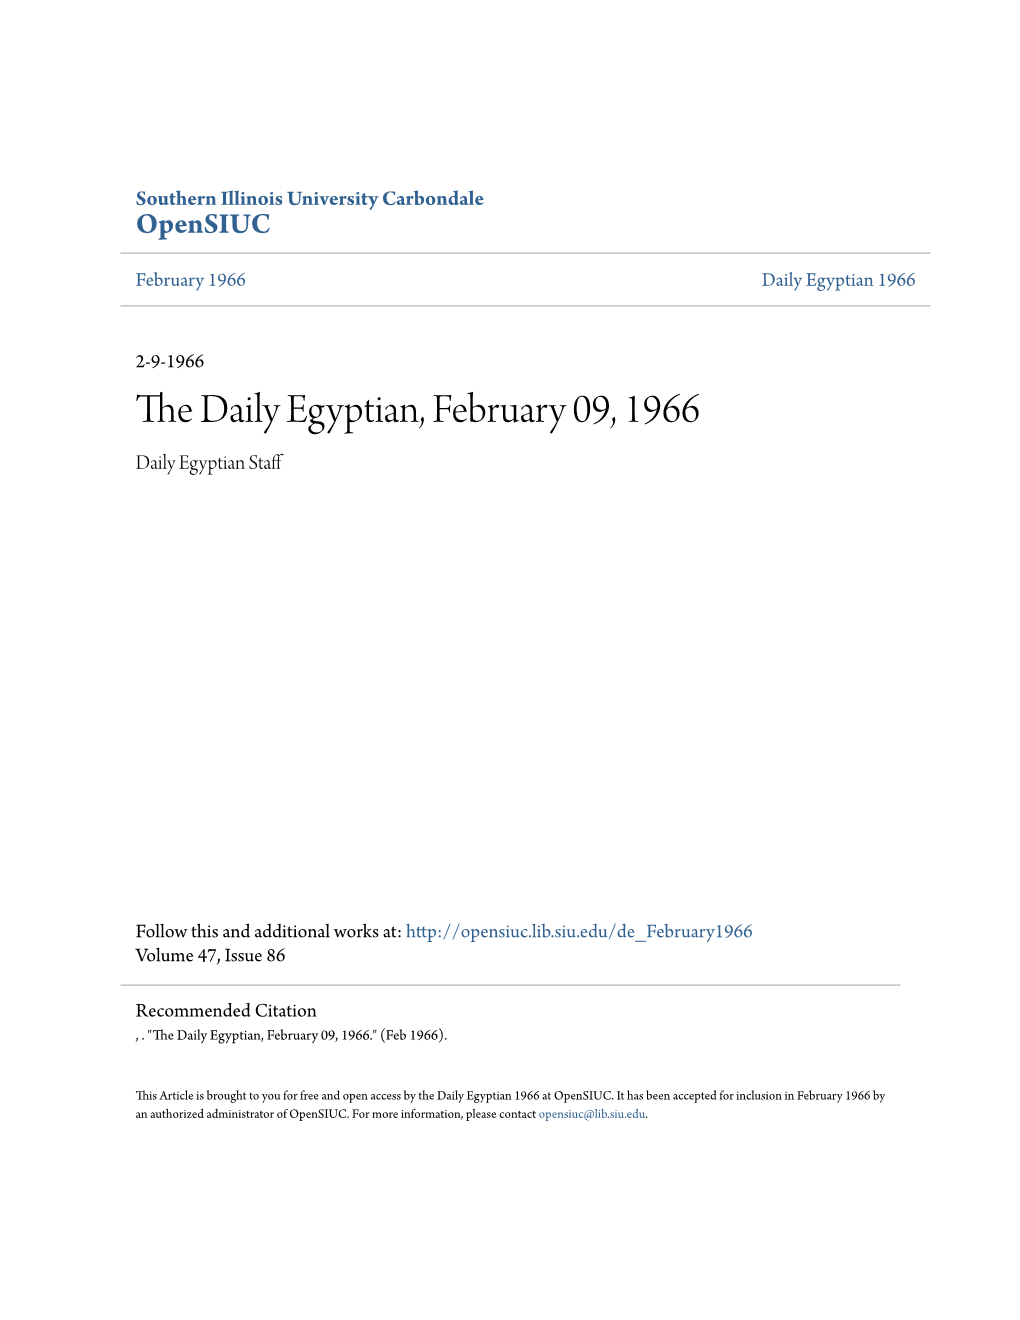 The Daily Egyptian, February 09, 1966